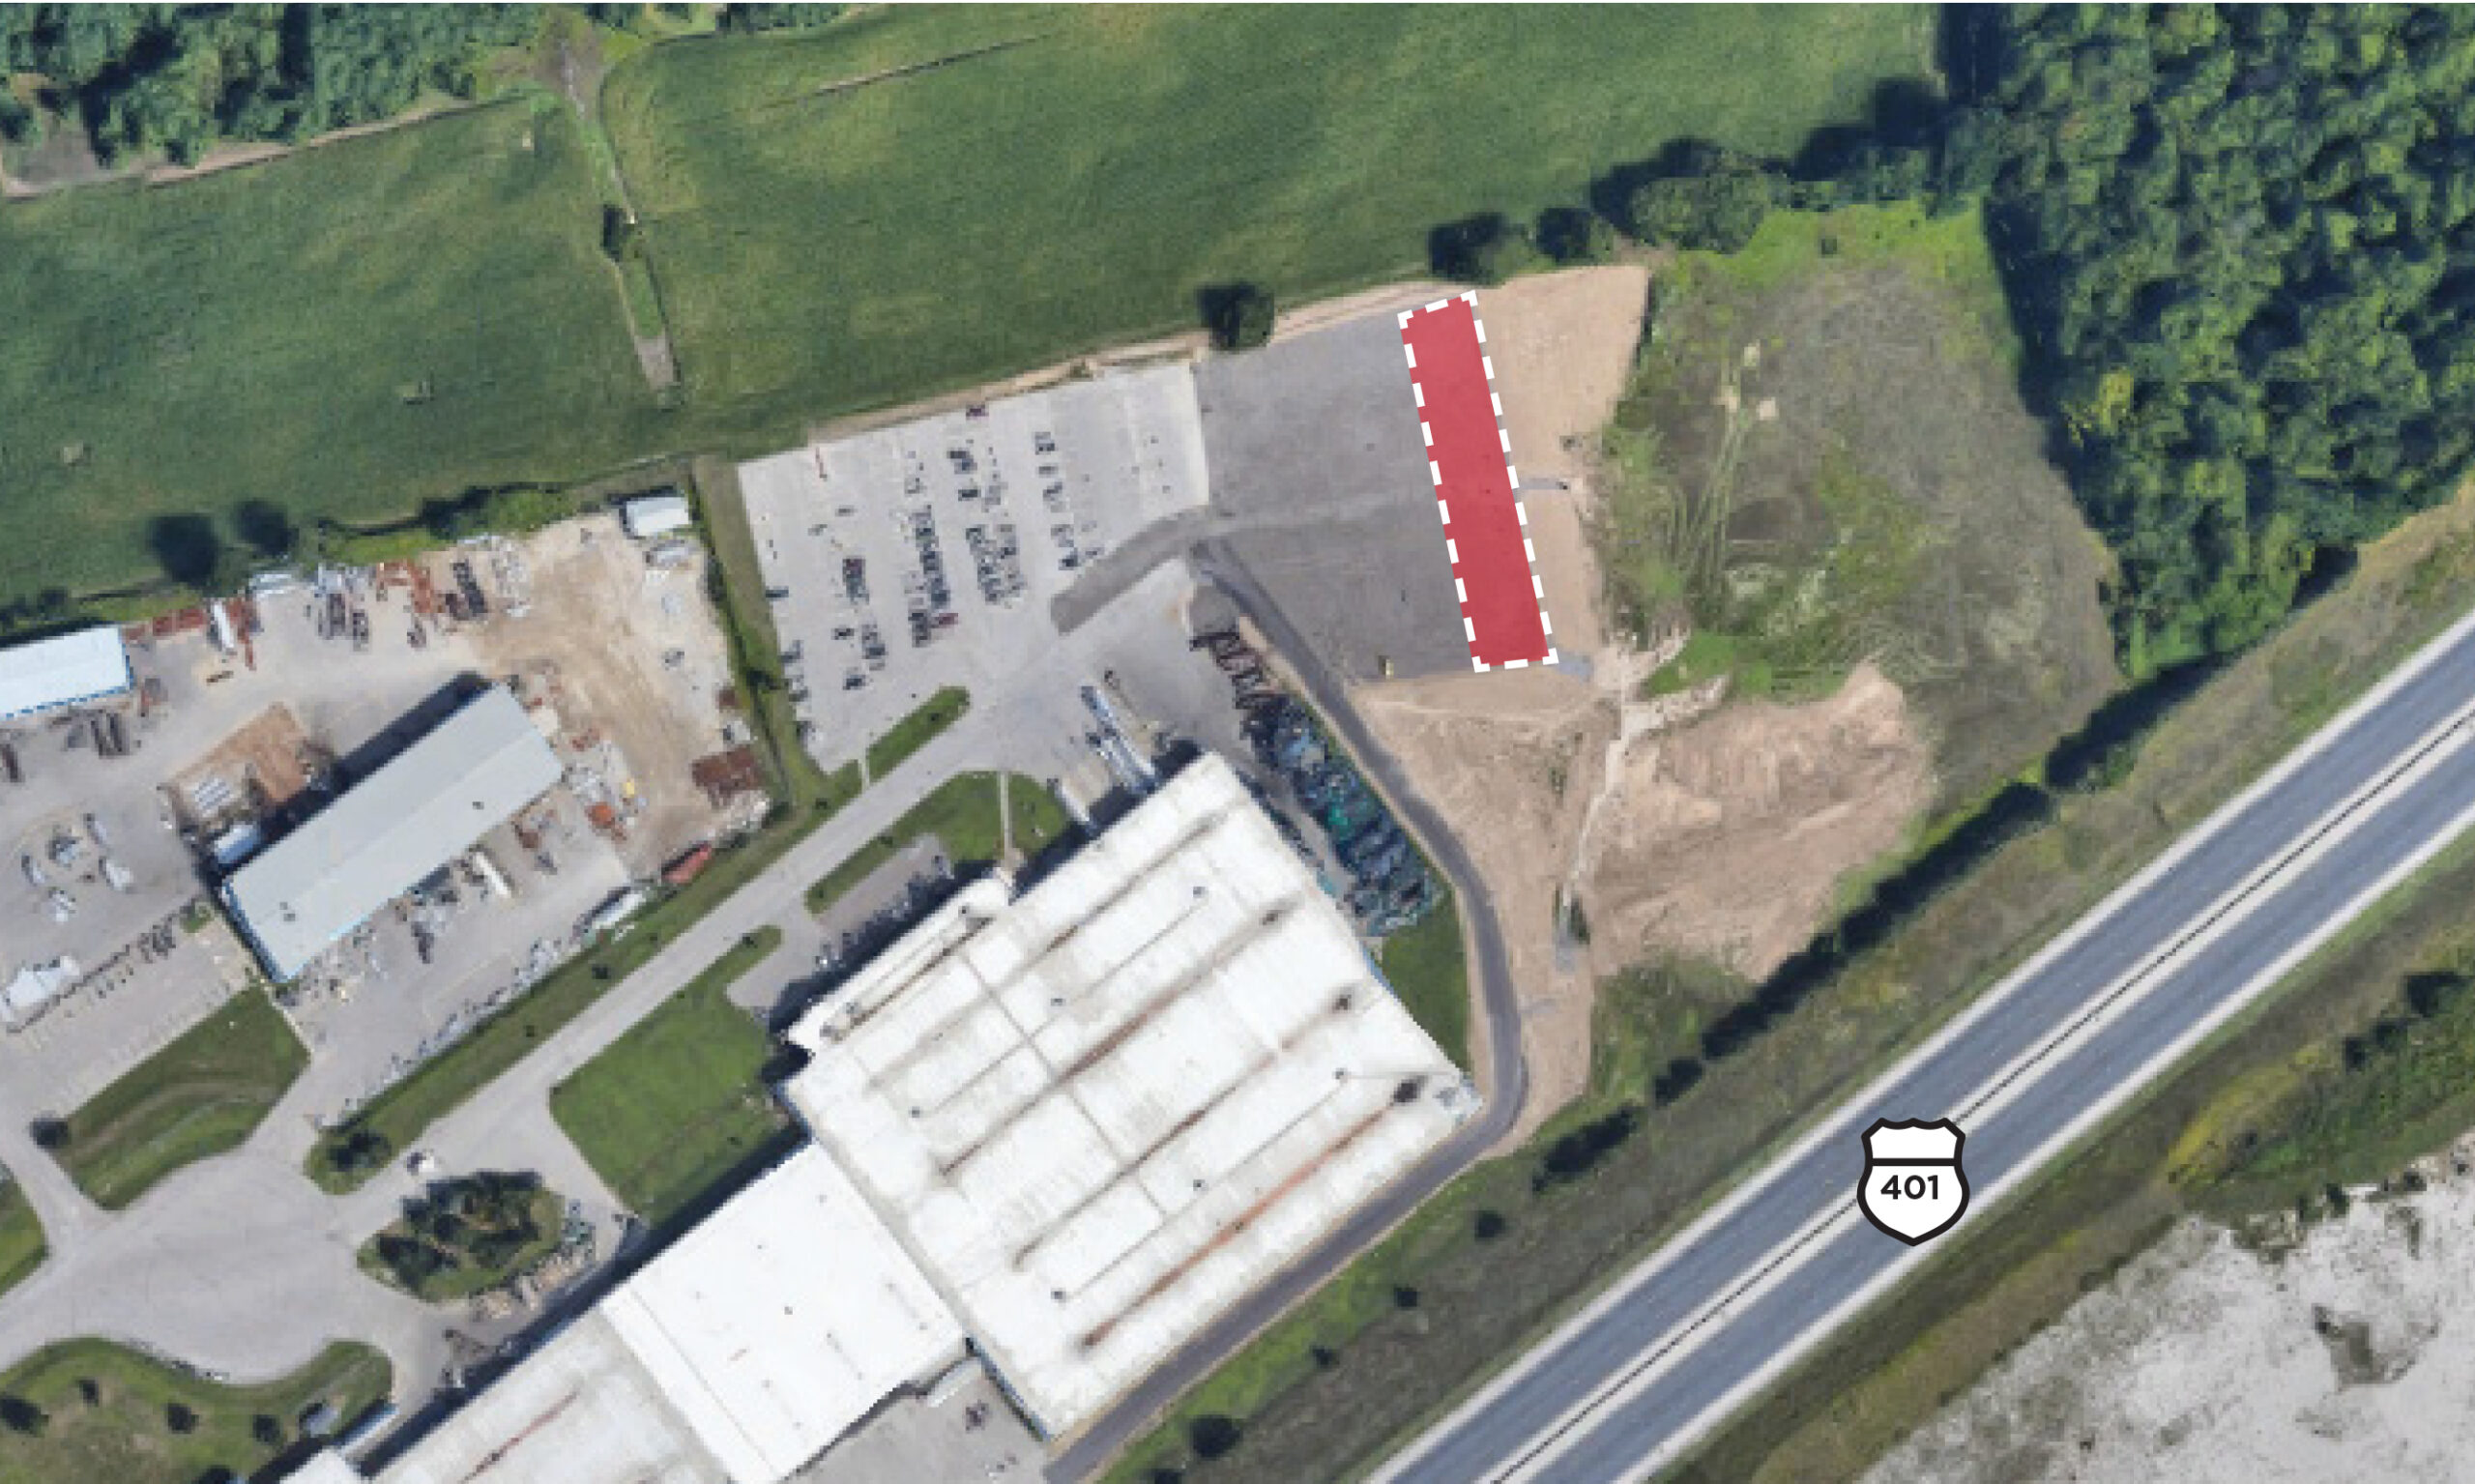 655 Waydom Drive, Ayr | 24 Trailer Parking Spaces for Lease